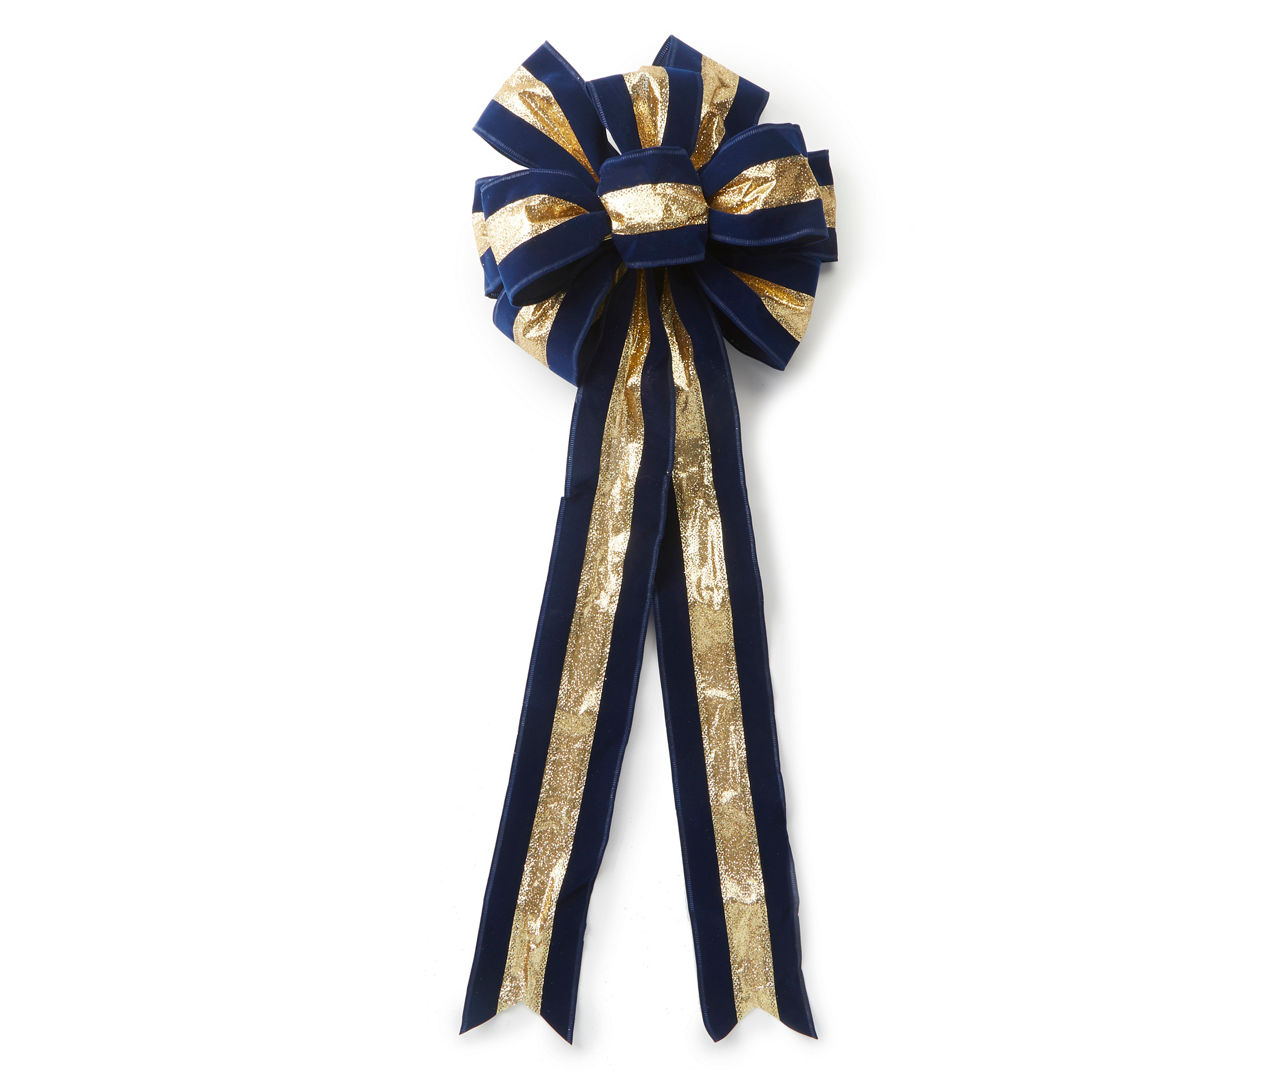 The Nora Beige & Navy Plaid Christmas Tree Topper Bow Luxury